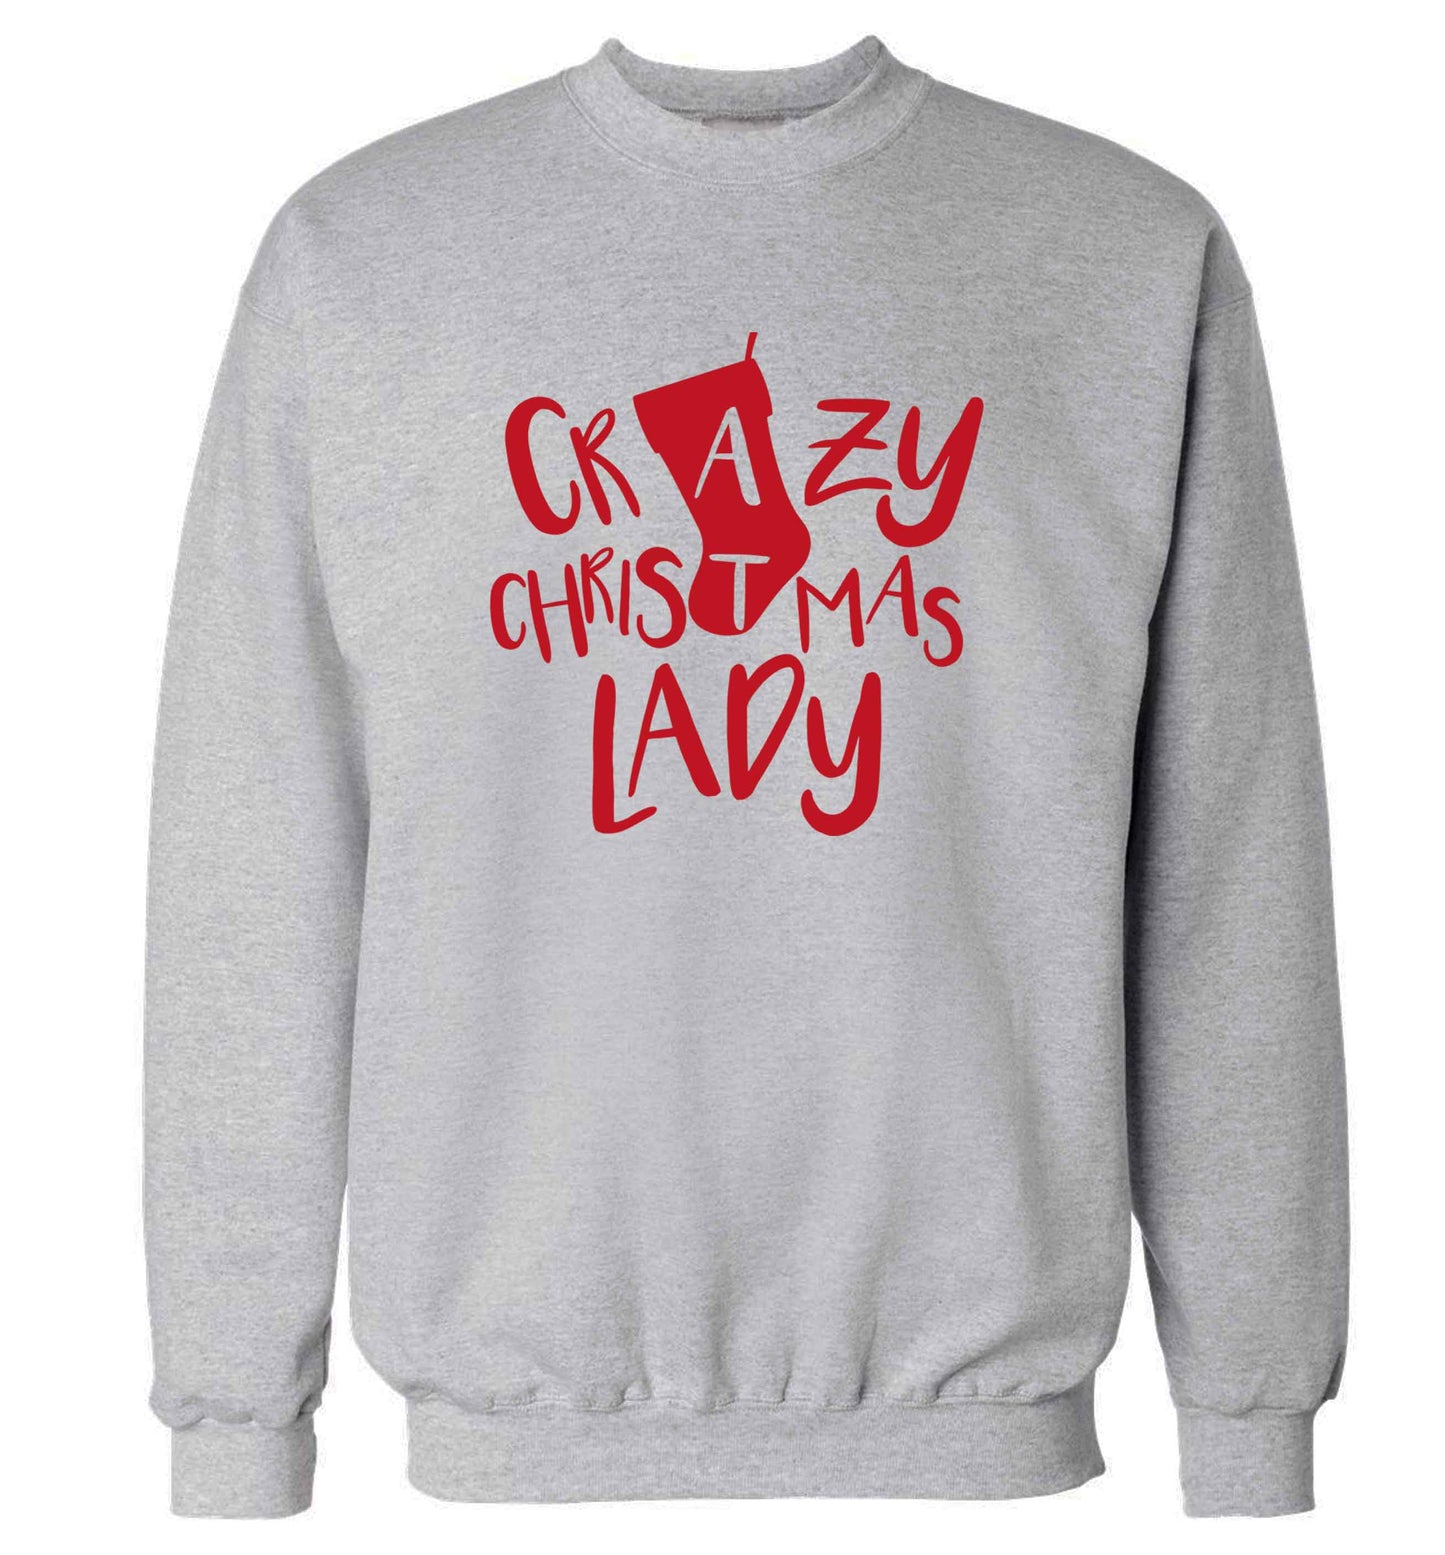 Crazy Christmas Dude adult's unisex grey sweater 2XL